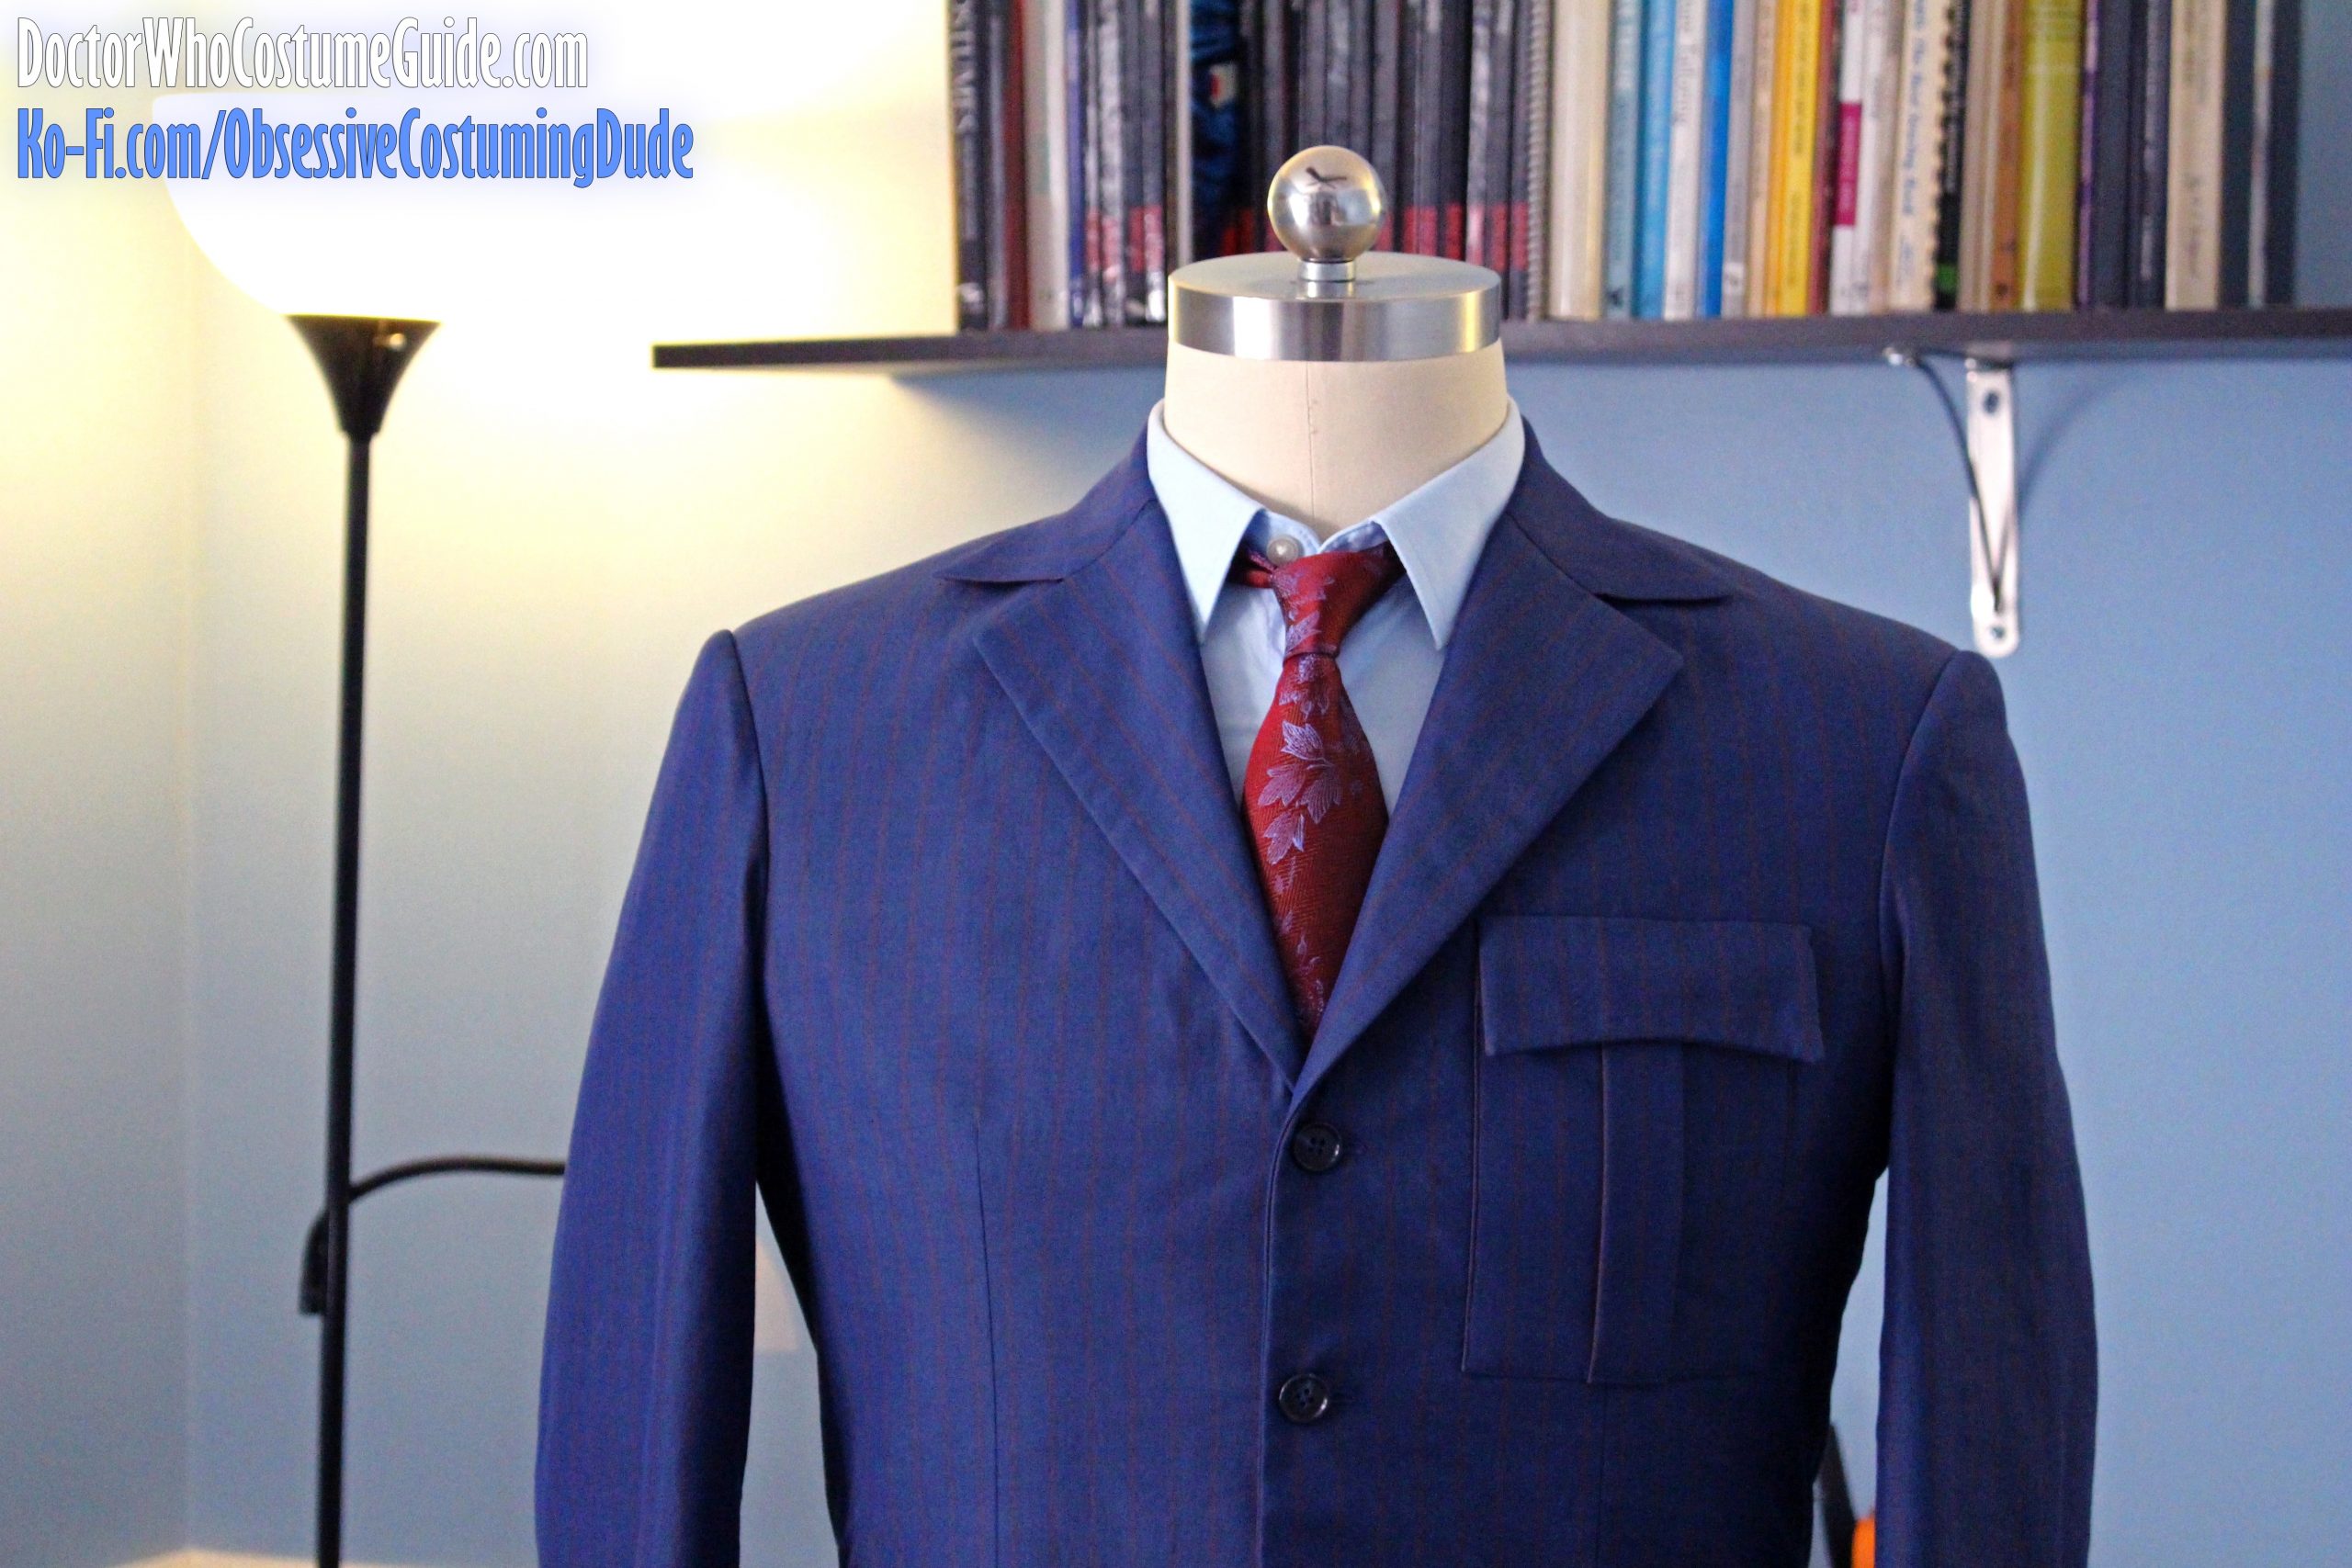 10th Doctor blue suit sewing tutorial - Doctor Who Costume Guide